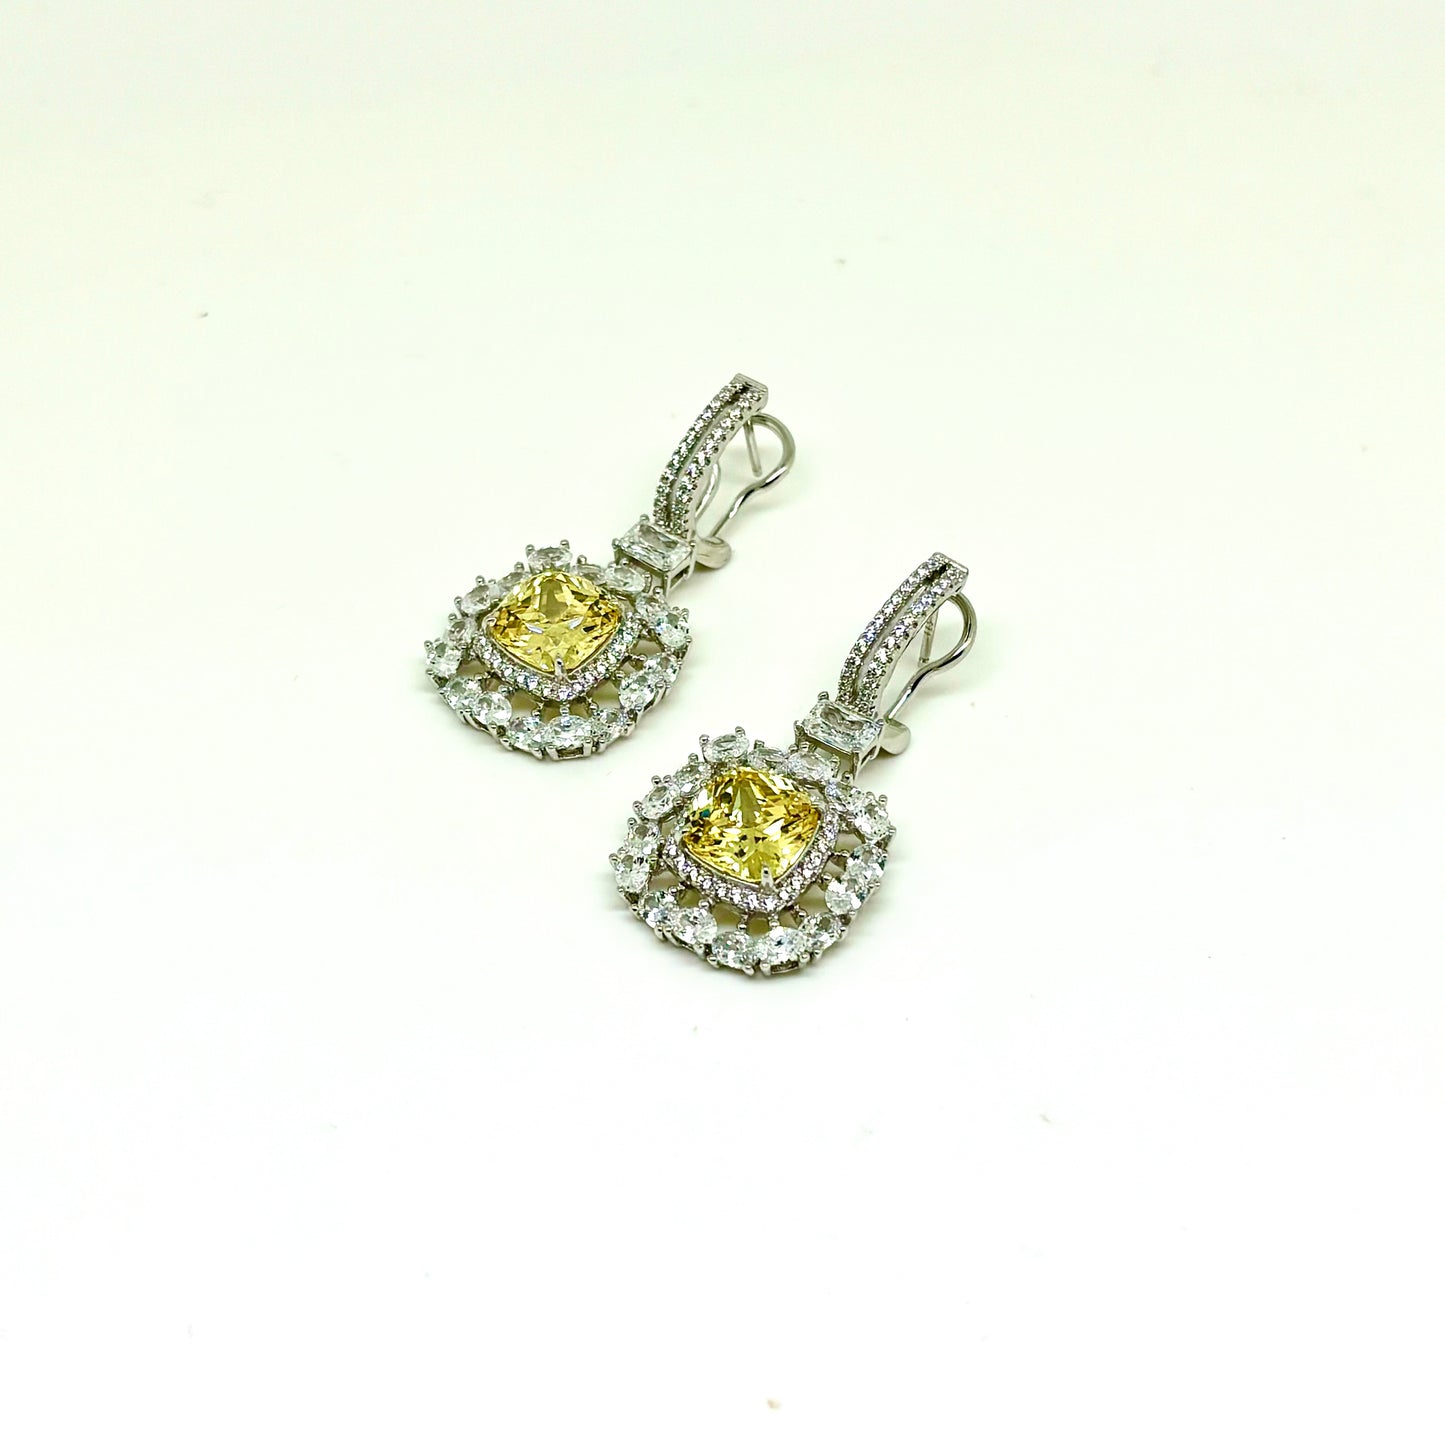 Canary Yellow and Clear Square Earrings